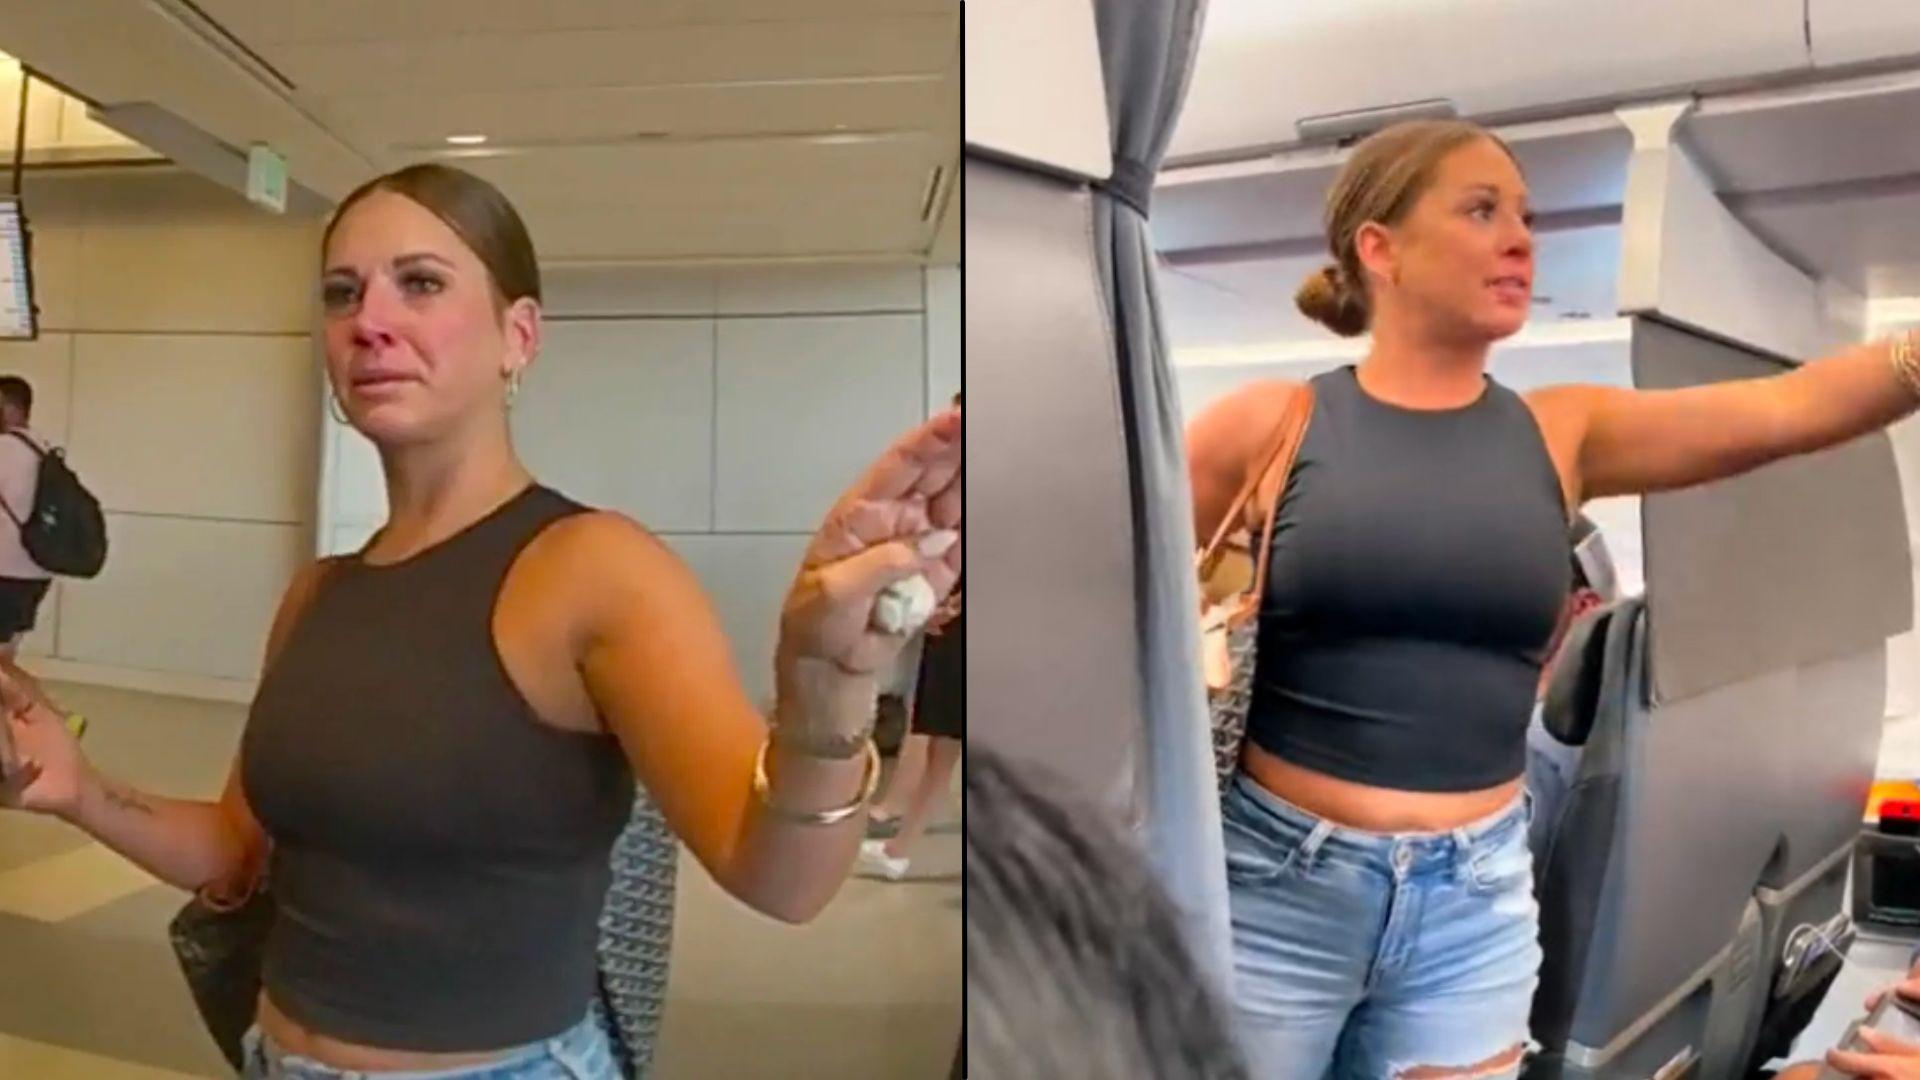 Tiffany Gomas from viral not real plane video arguing with police and on plane